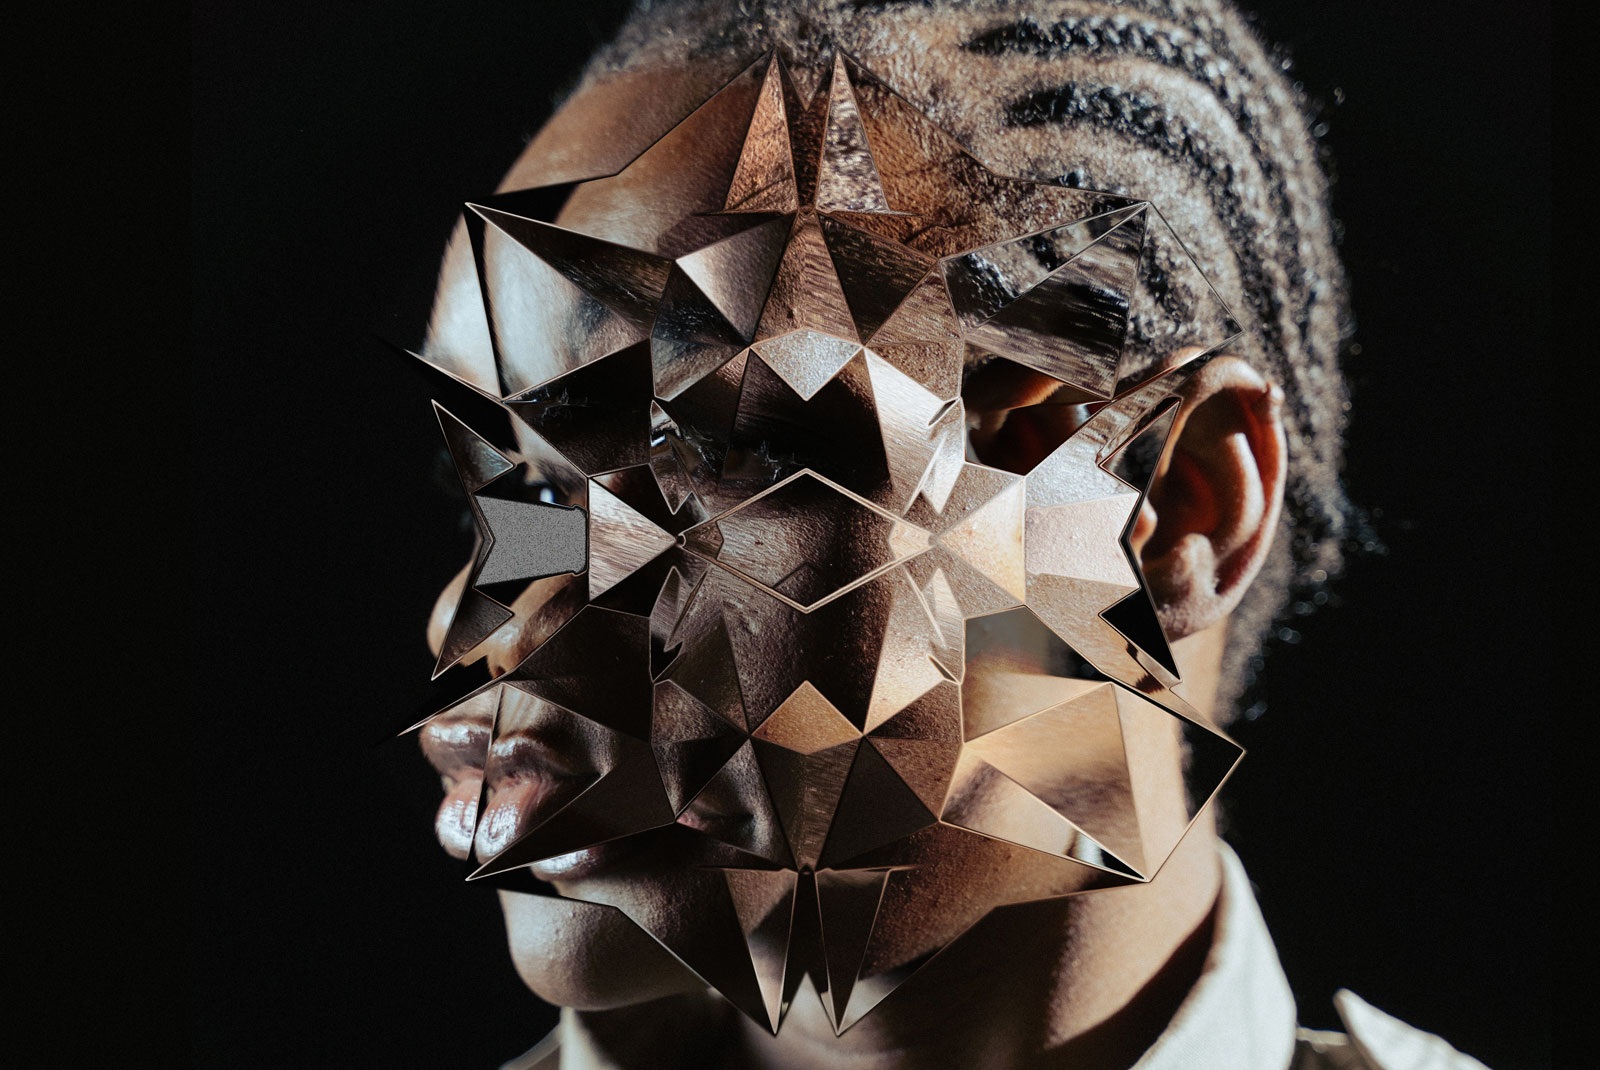 Person wearing a geometric metallic mask, artistic portrait, ideal for mockups or graphics for avant-garde design concepts.